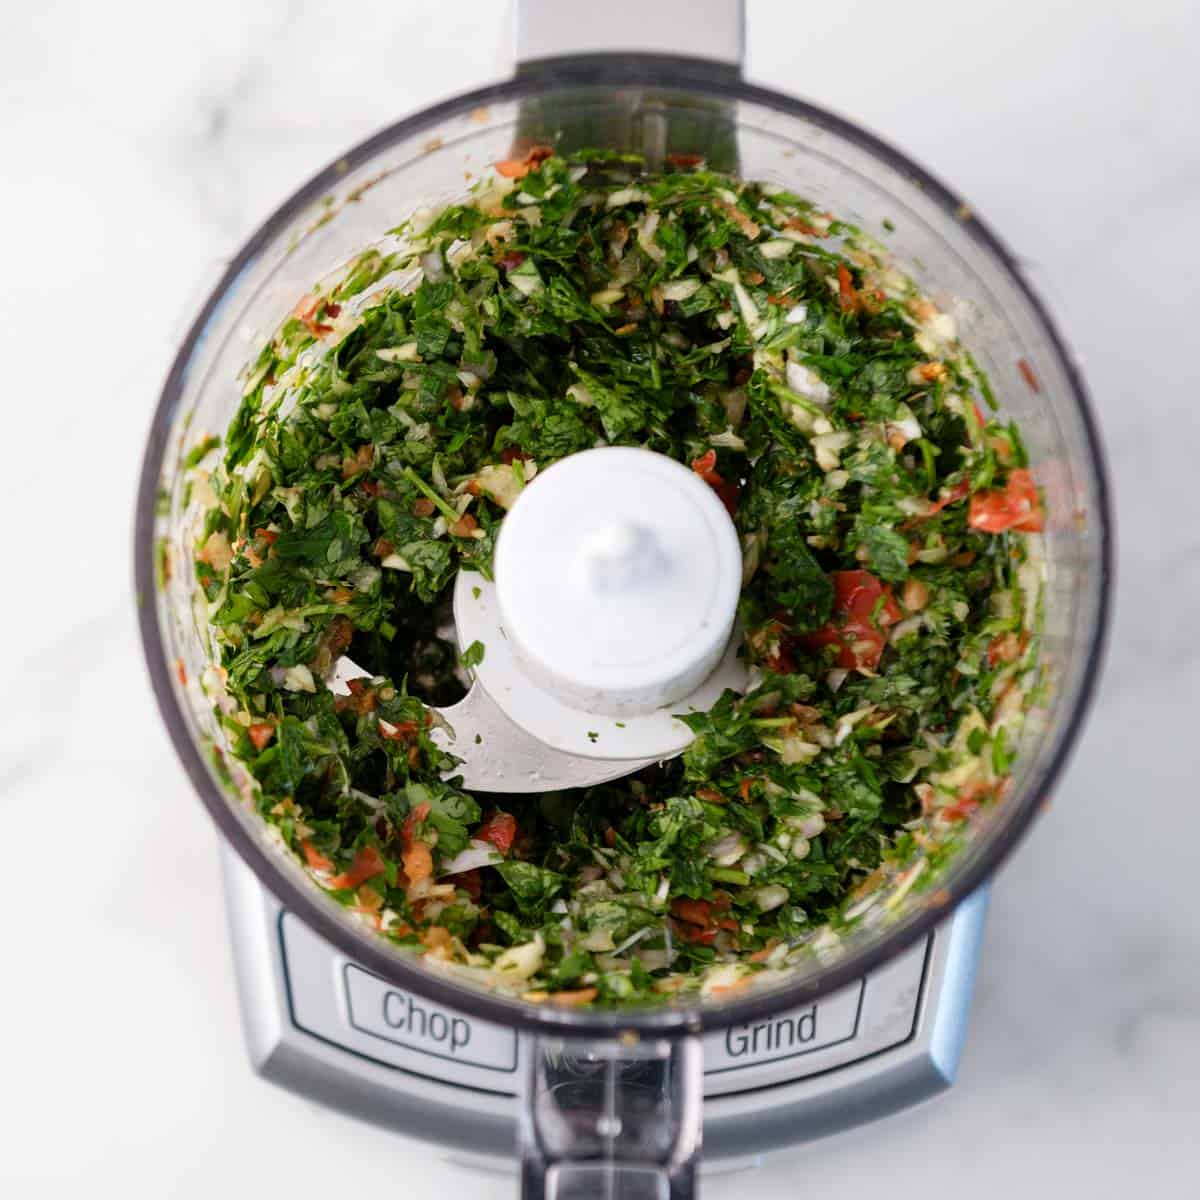 Blended up herbs, peppers and spices in a food processor